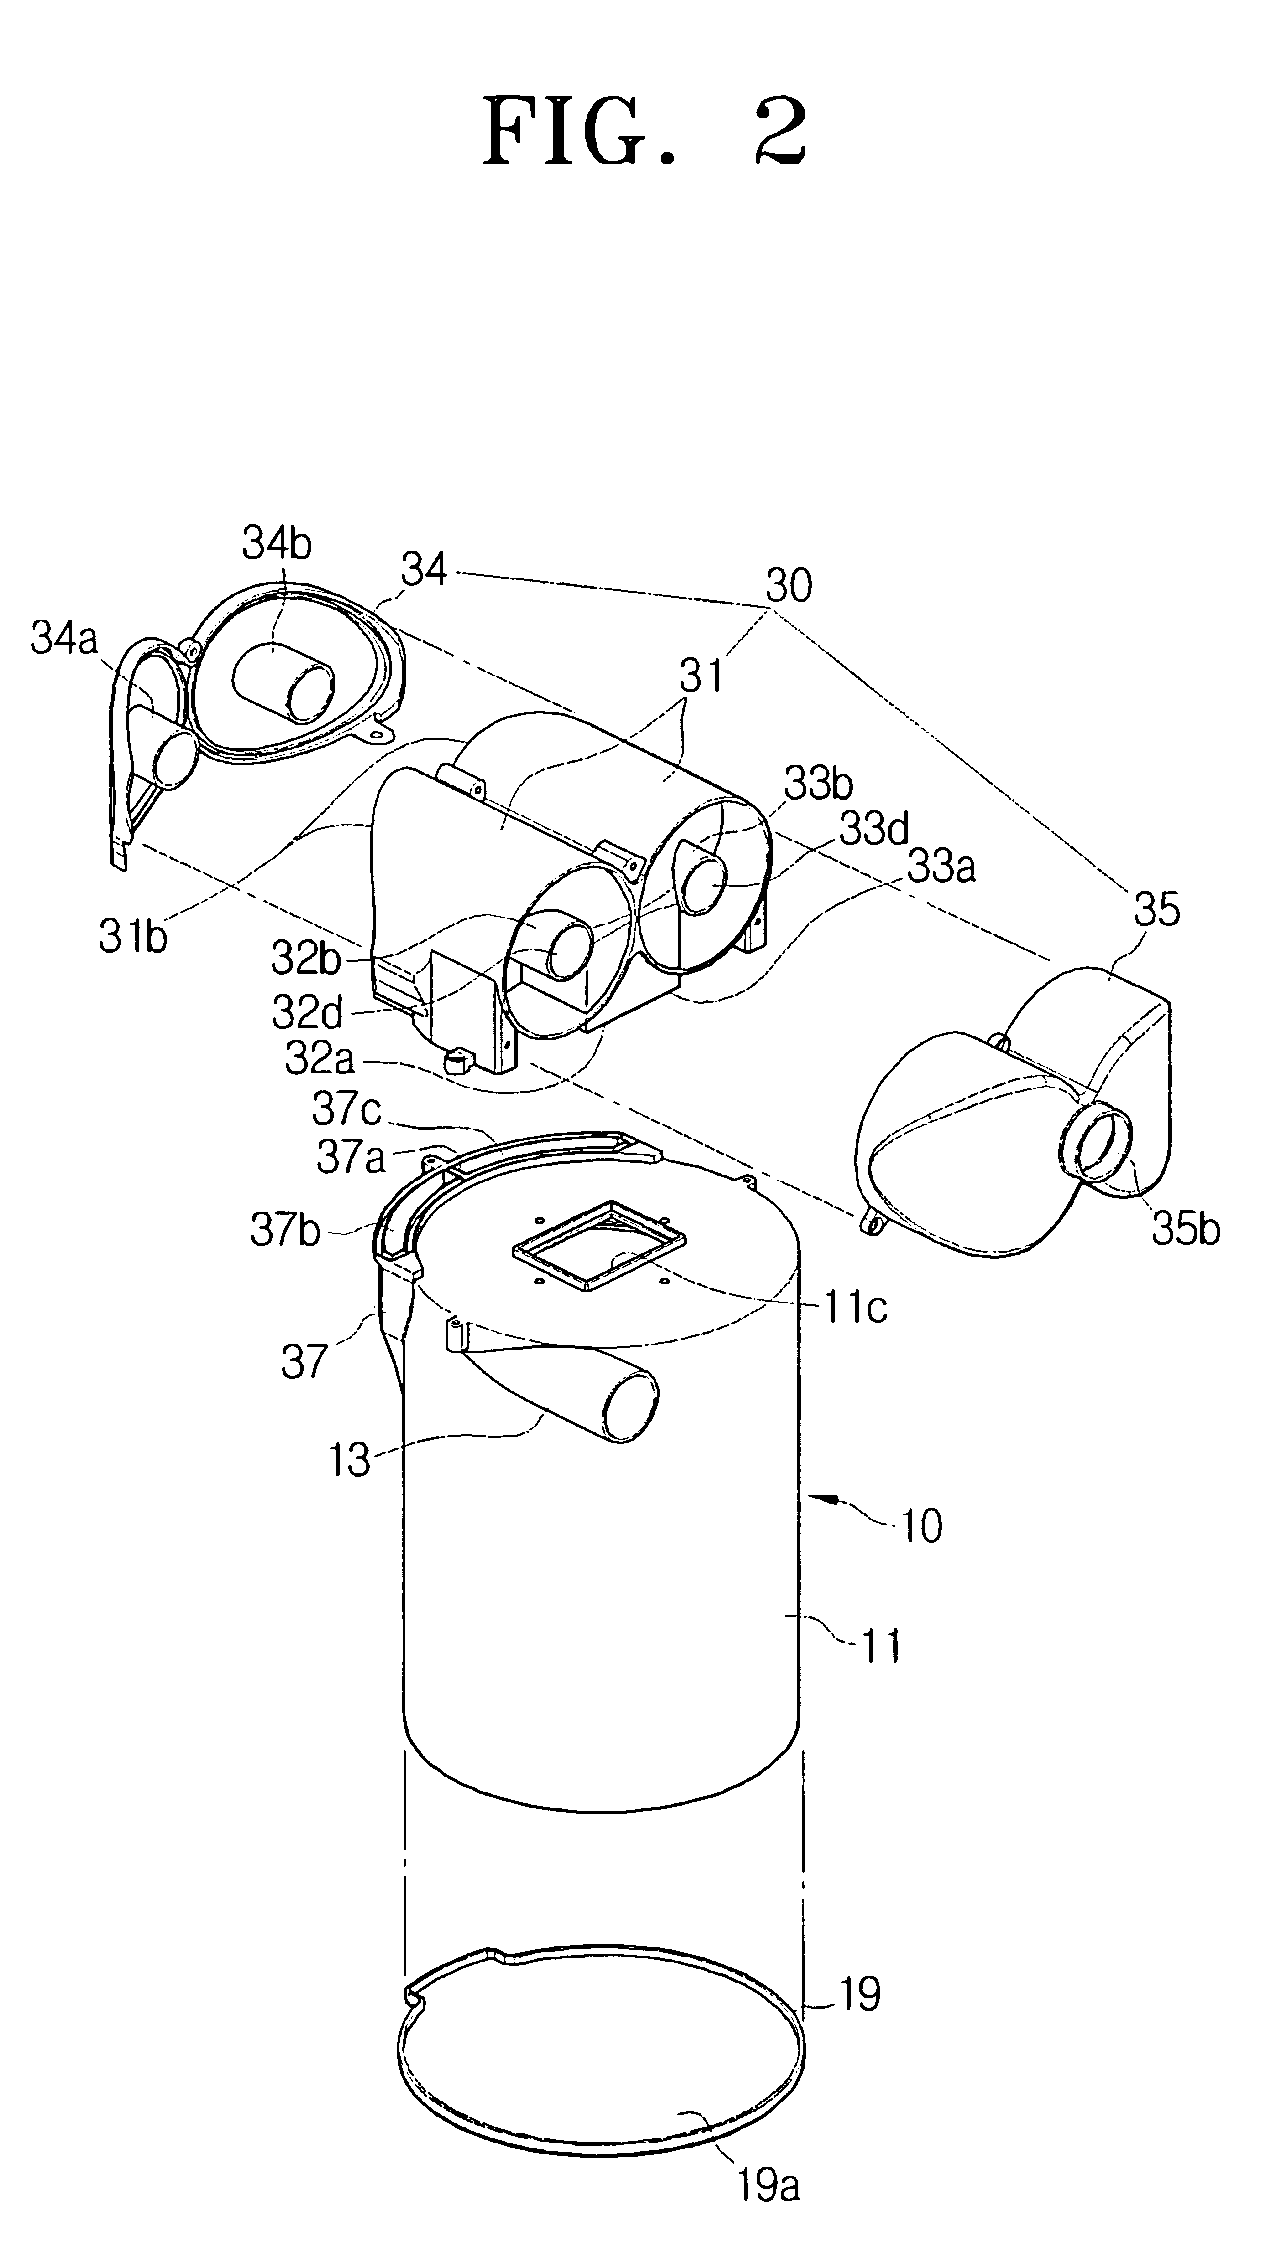 Cyclone dust-collecting apparatus